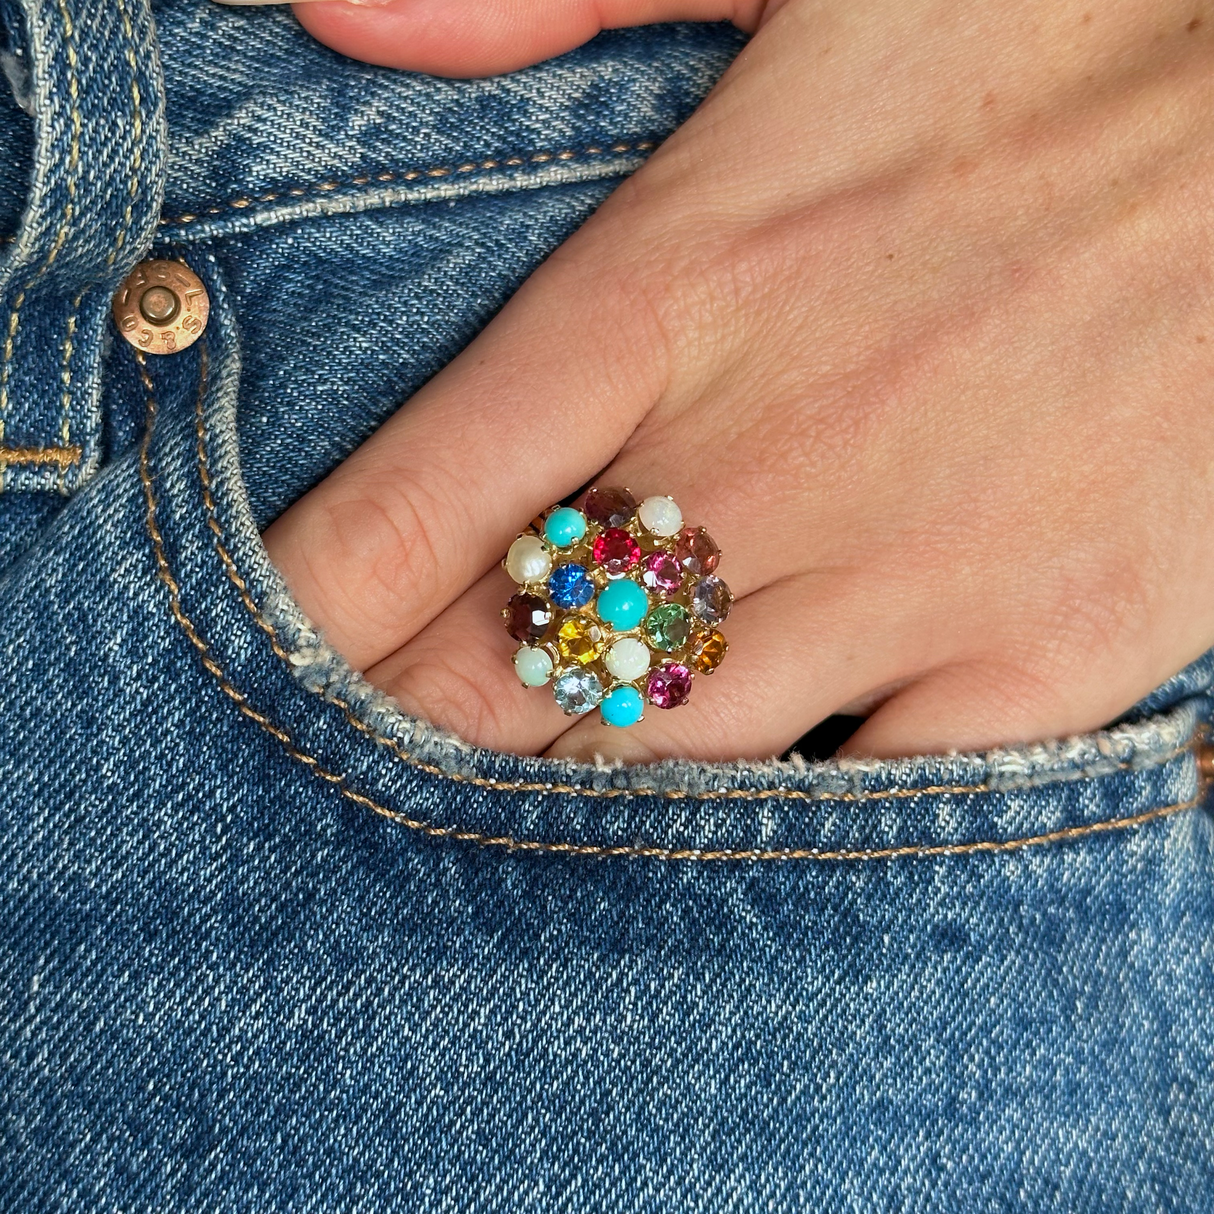  Multi gemstone cluster ring worn on hand in pocket of jeans, front view.